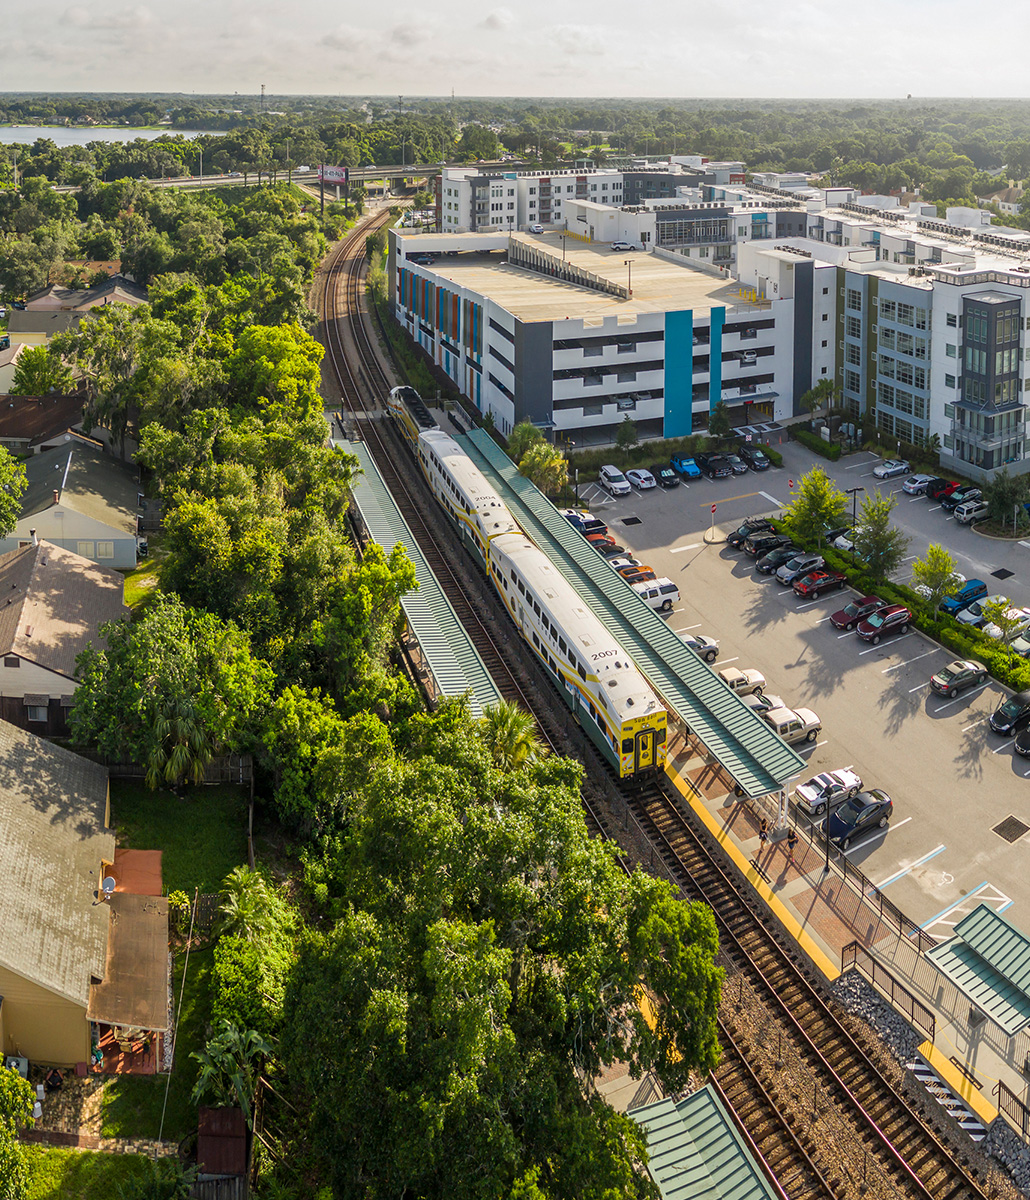 Aerial image of SunRail Train at Maitland Station with apartments in the background